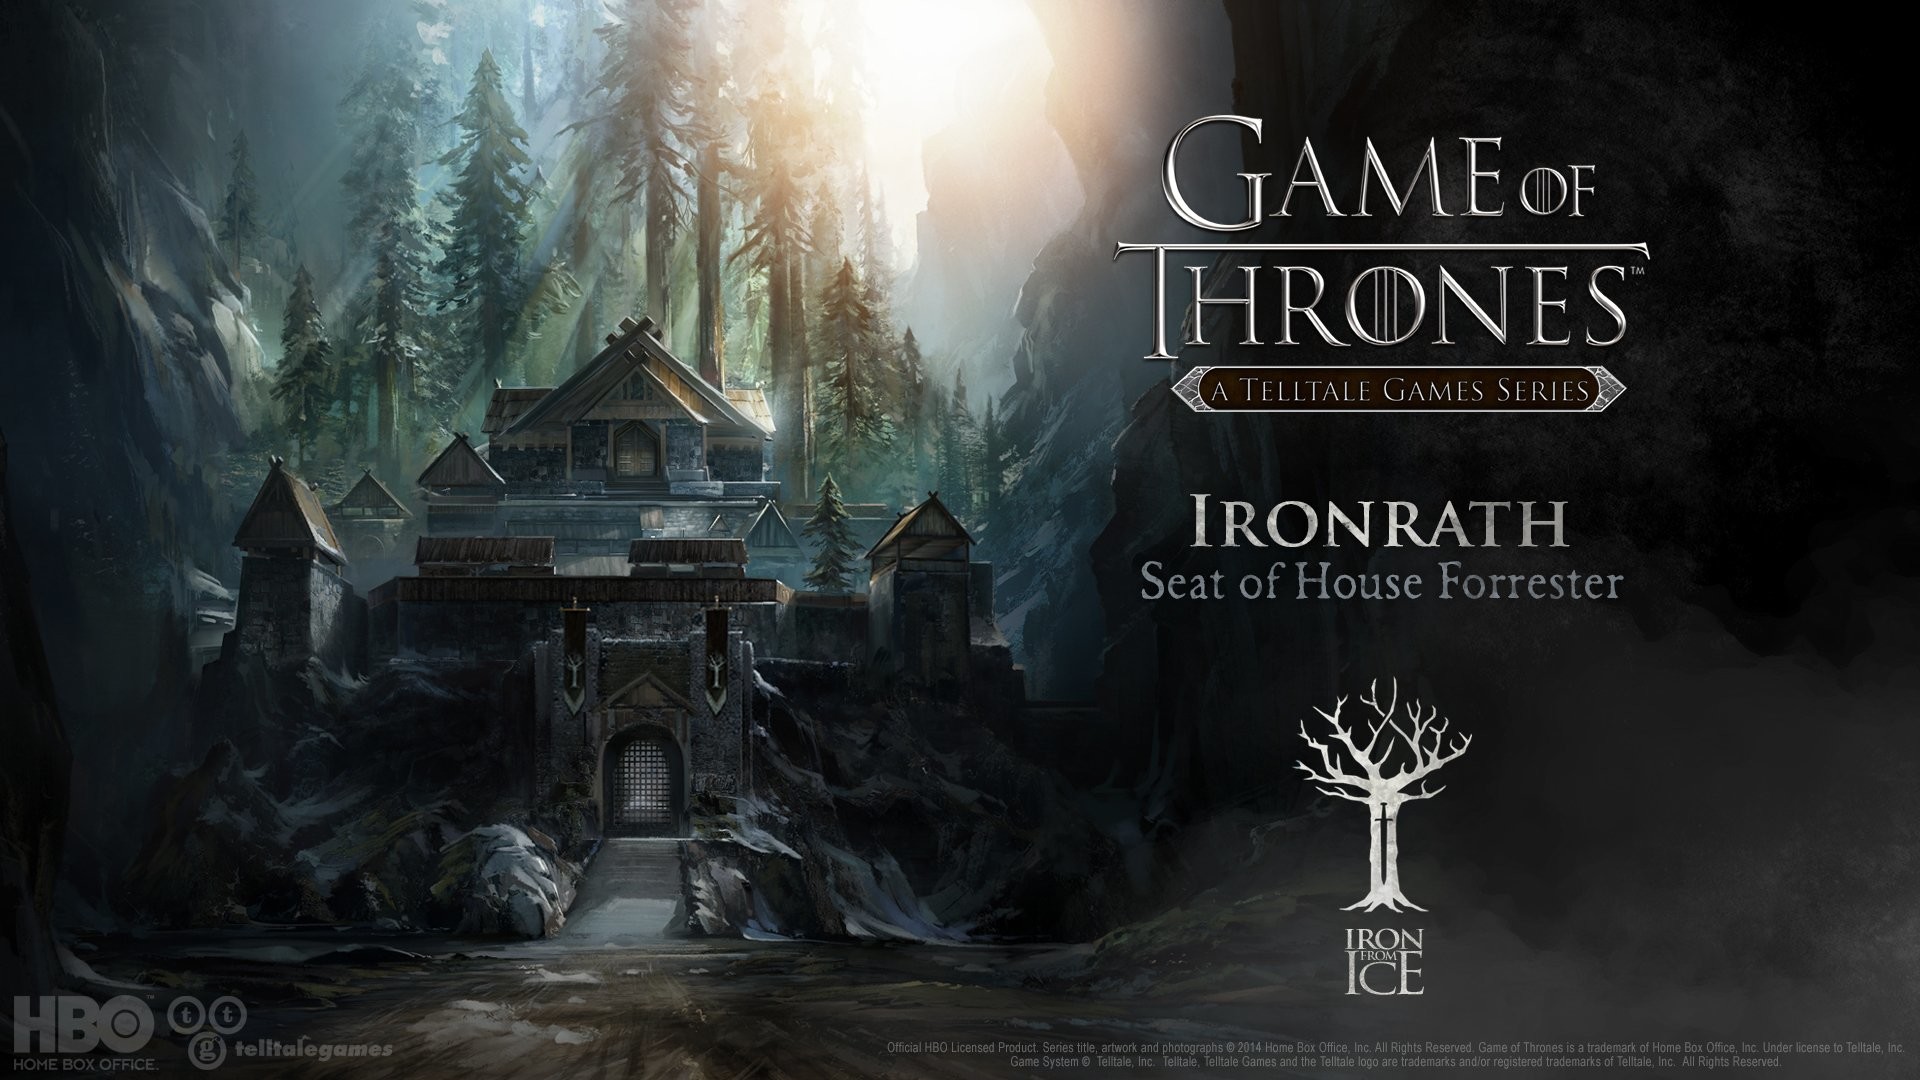 1920x1080 Game of Thrones - A Telltale Games Series HD Wallpapers